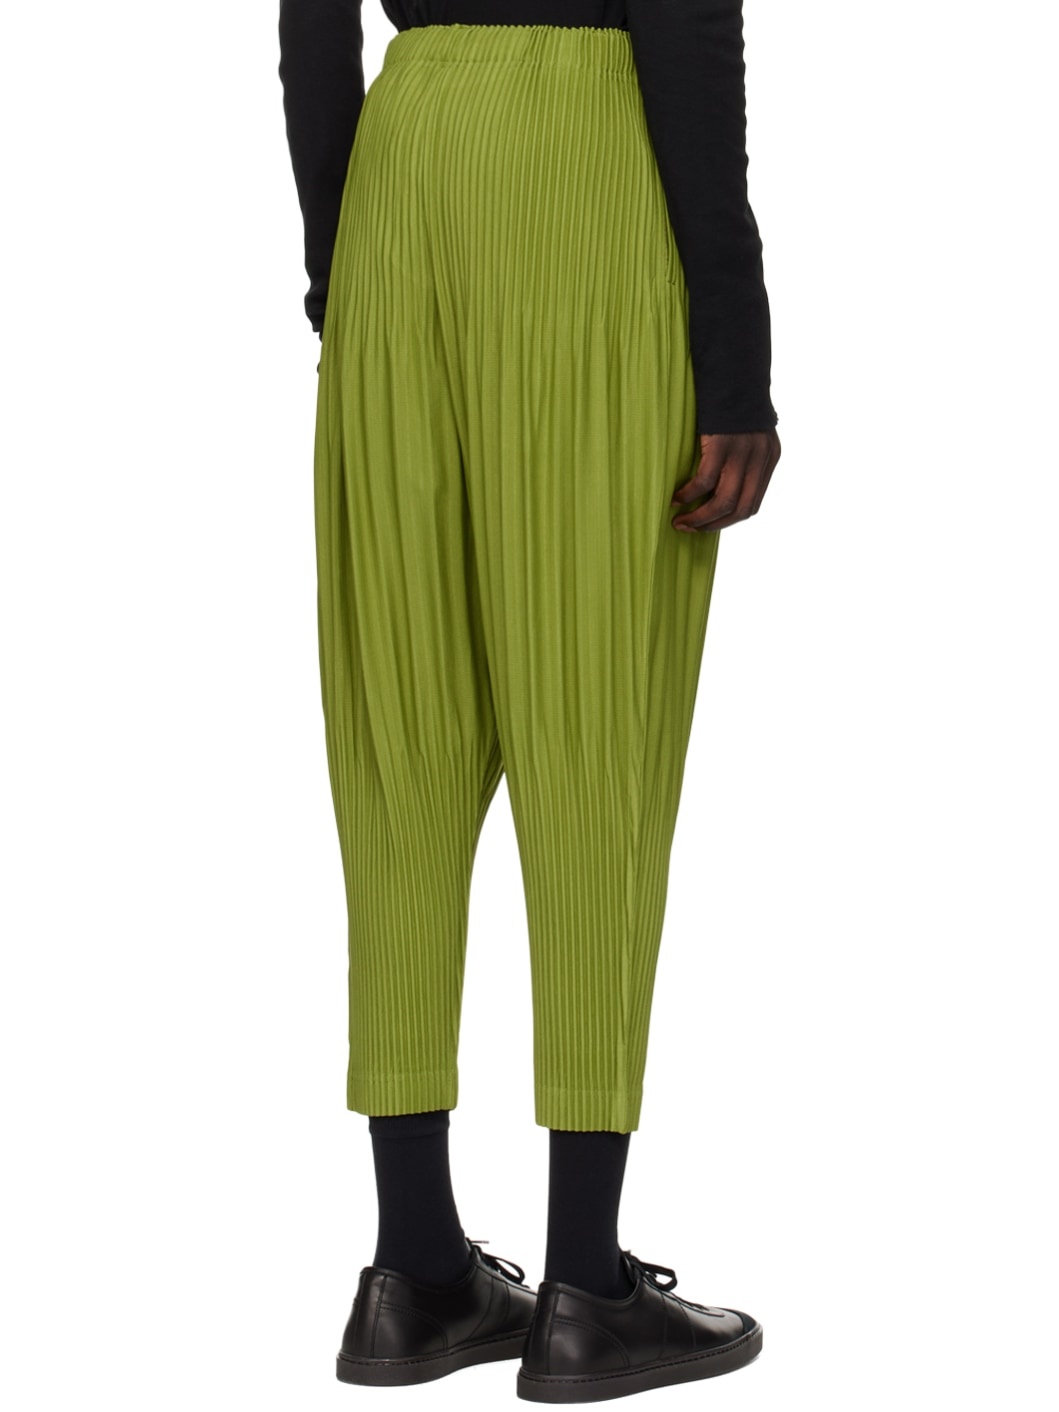 Green Monthly Color December Trousers - 3